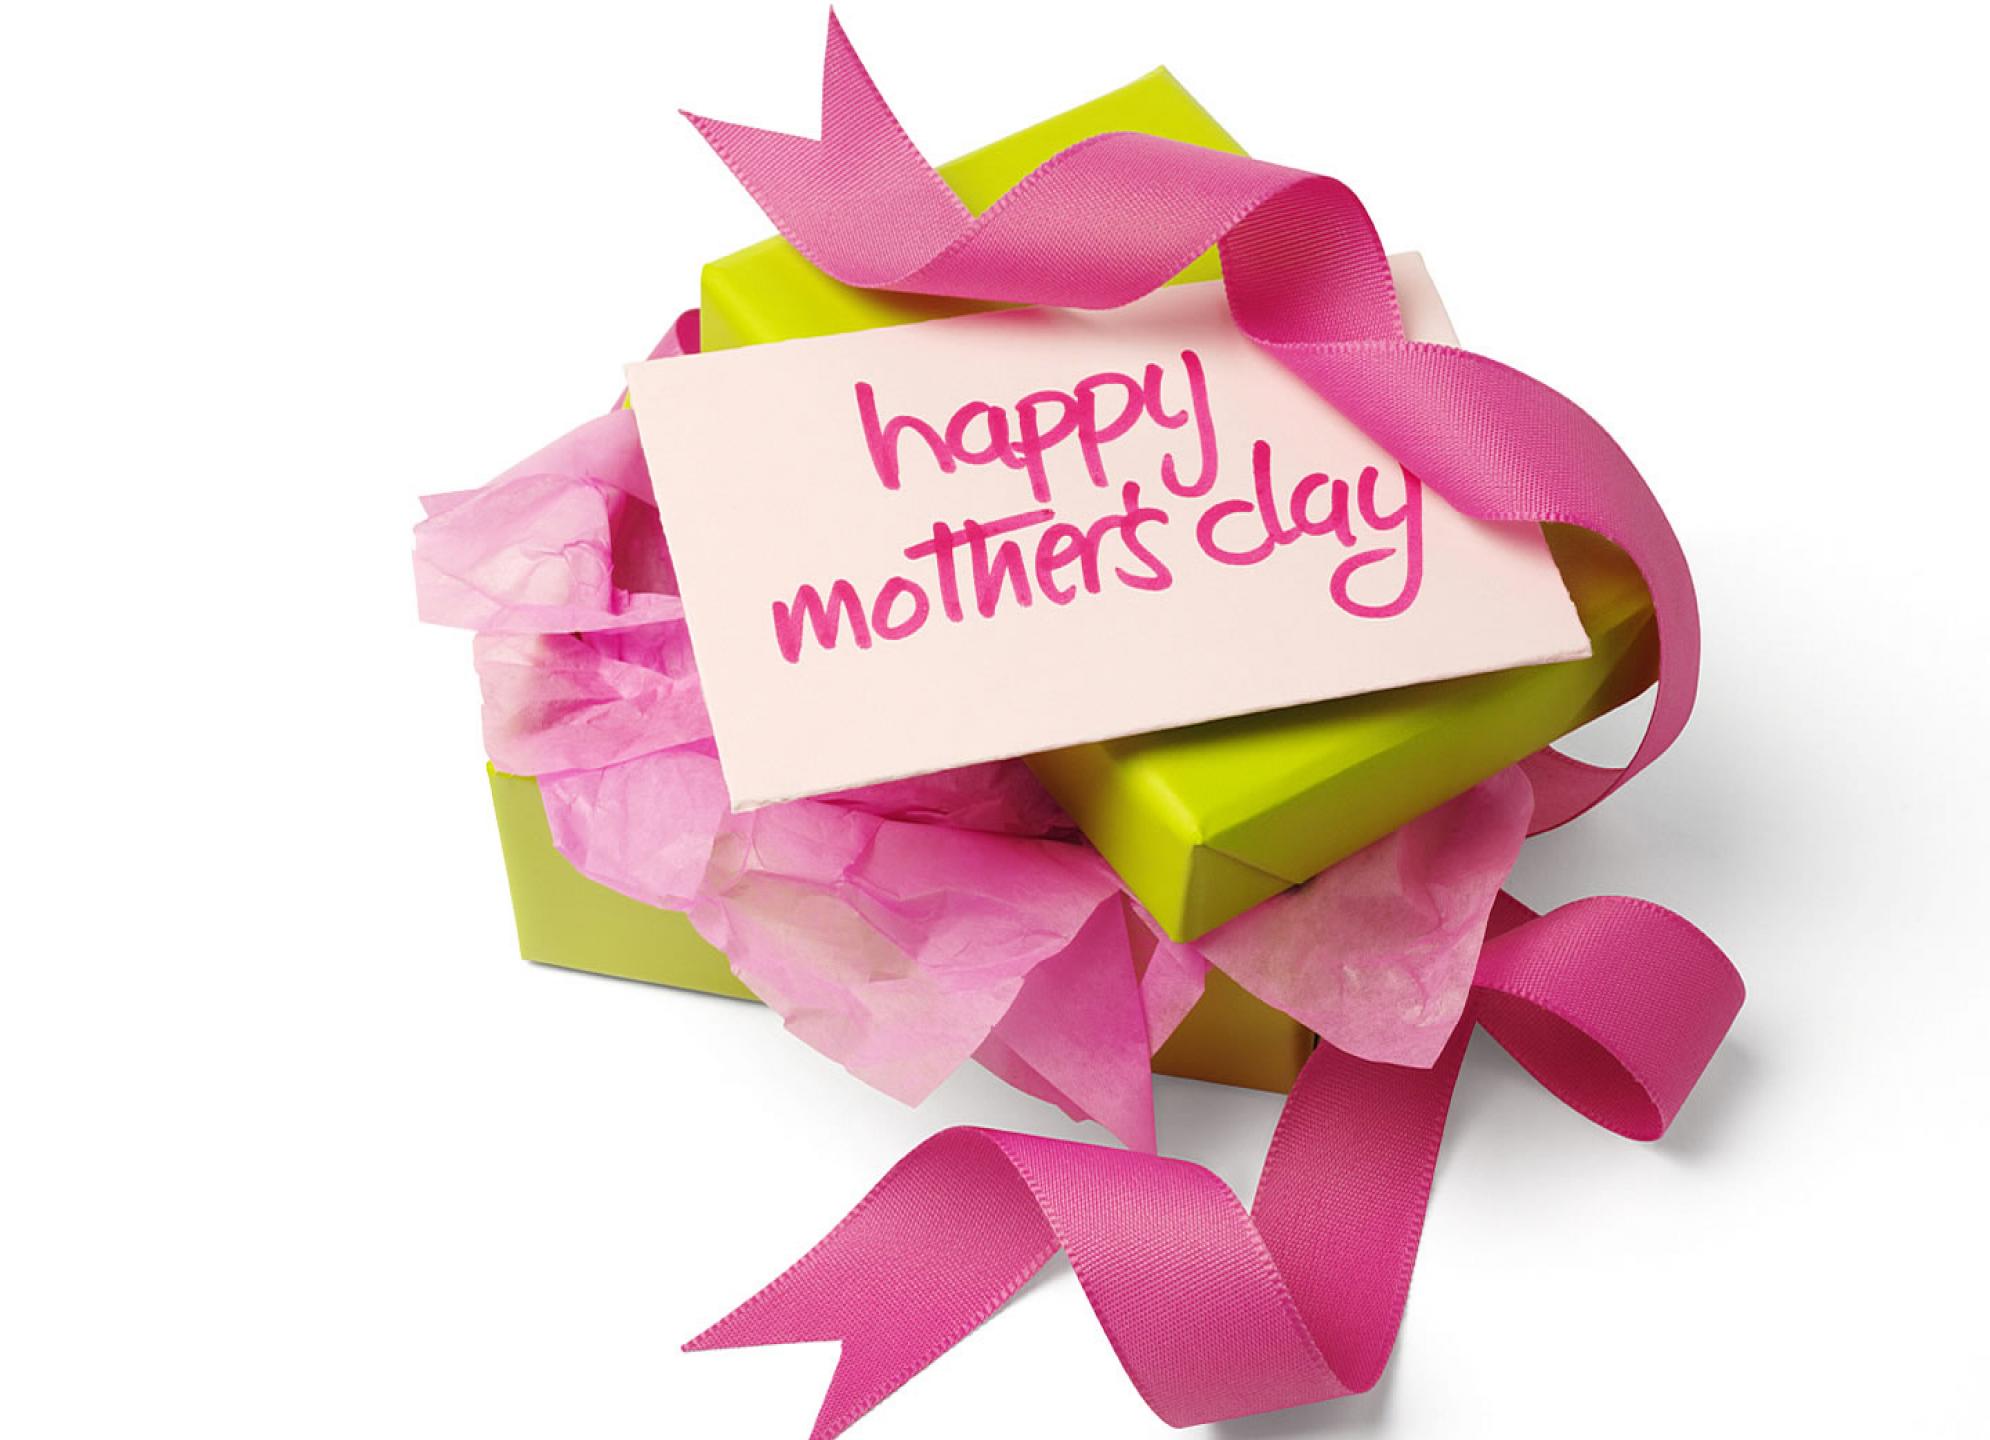 Happy Mothers Day Greeting Photos With Gift Desktop Image